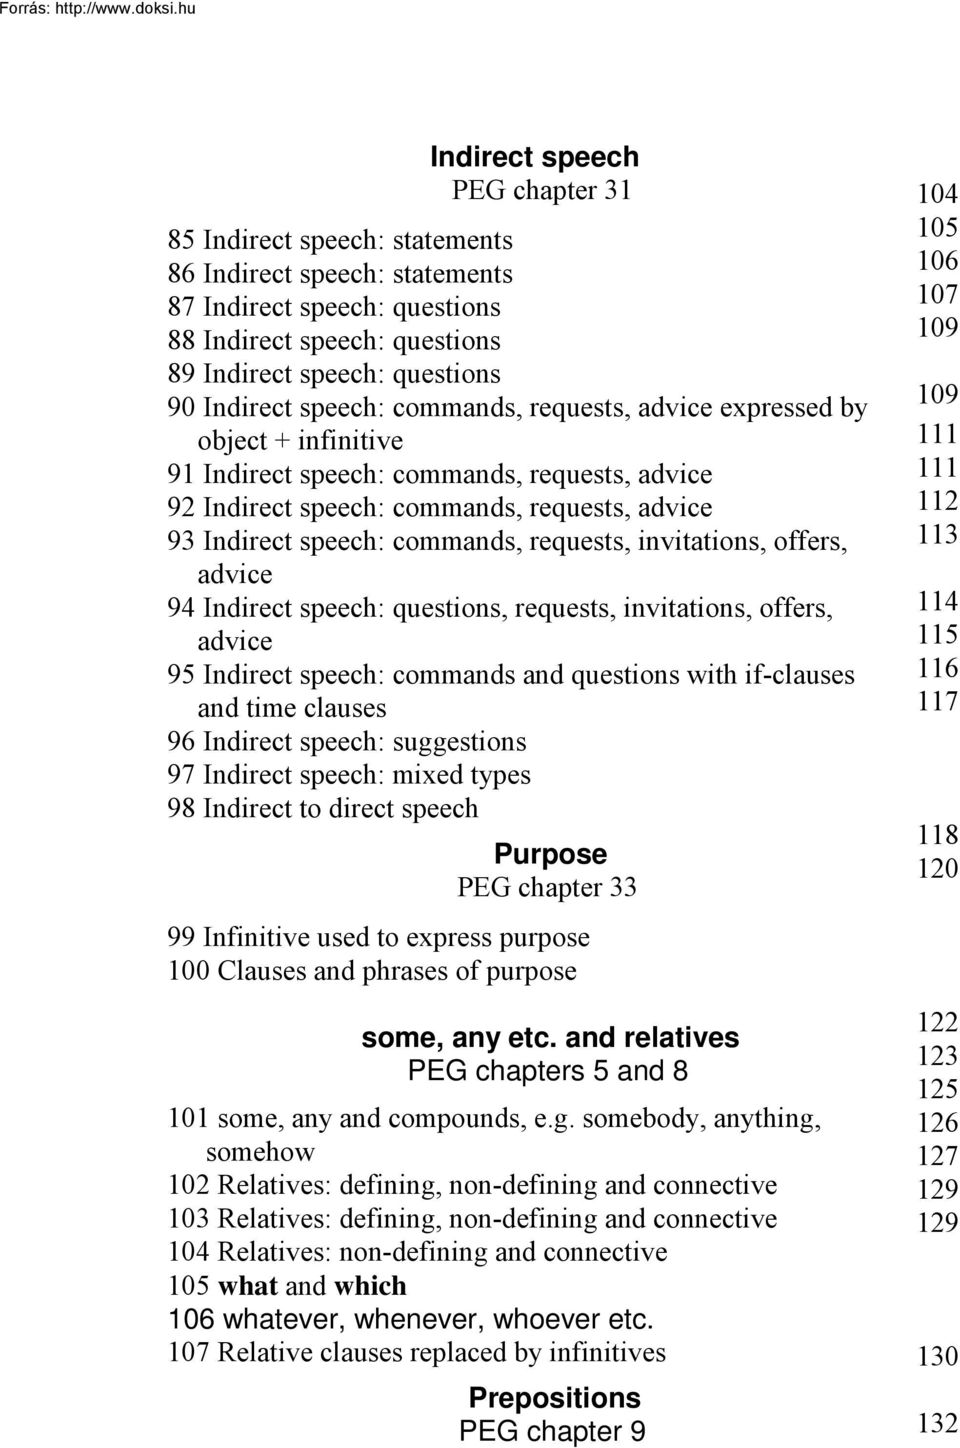 requests, invitations, offers, advice 94 Indirect speech: questions, requests, invitations, offers, advice 95 Indirect speech: commands and questions with if-clauses and time clauses 96 Indirect